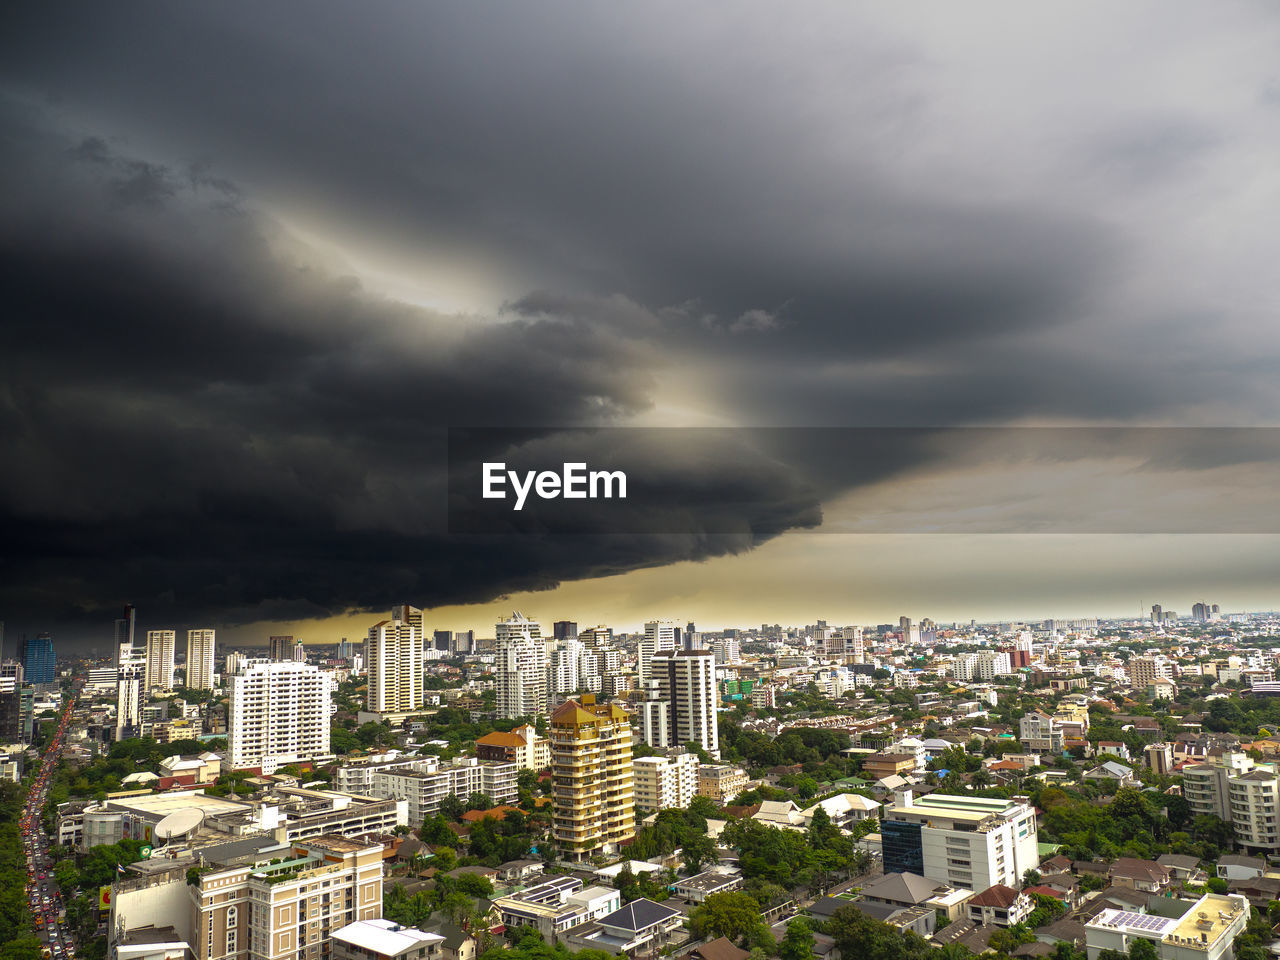 HIGH ANGLE VIEW OF CITY BUILDINGS AGAINST STORM CLOUDS